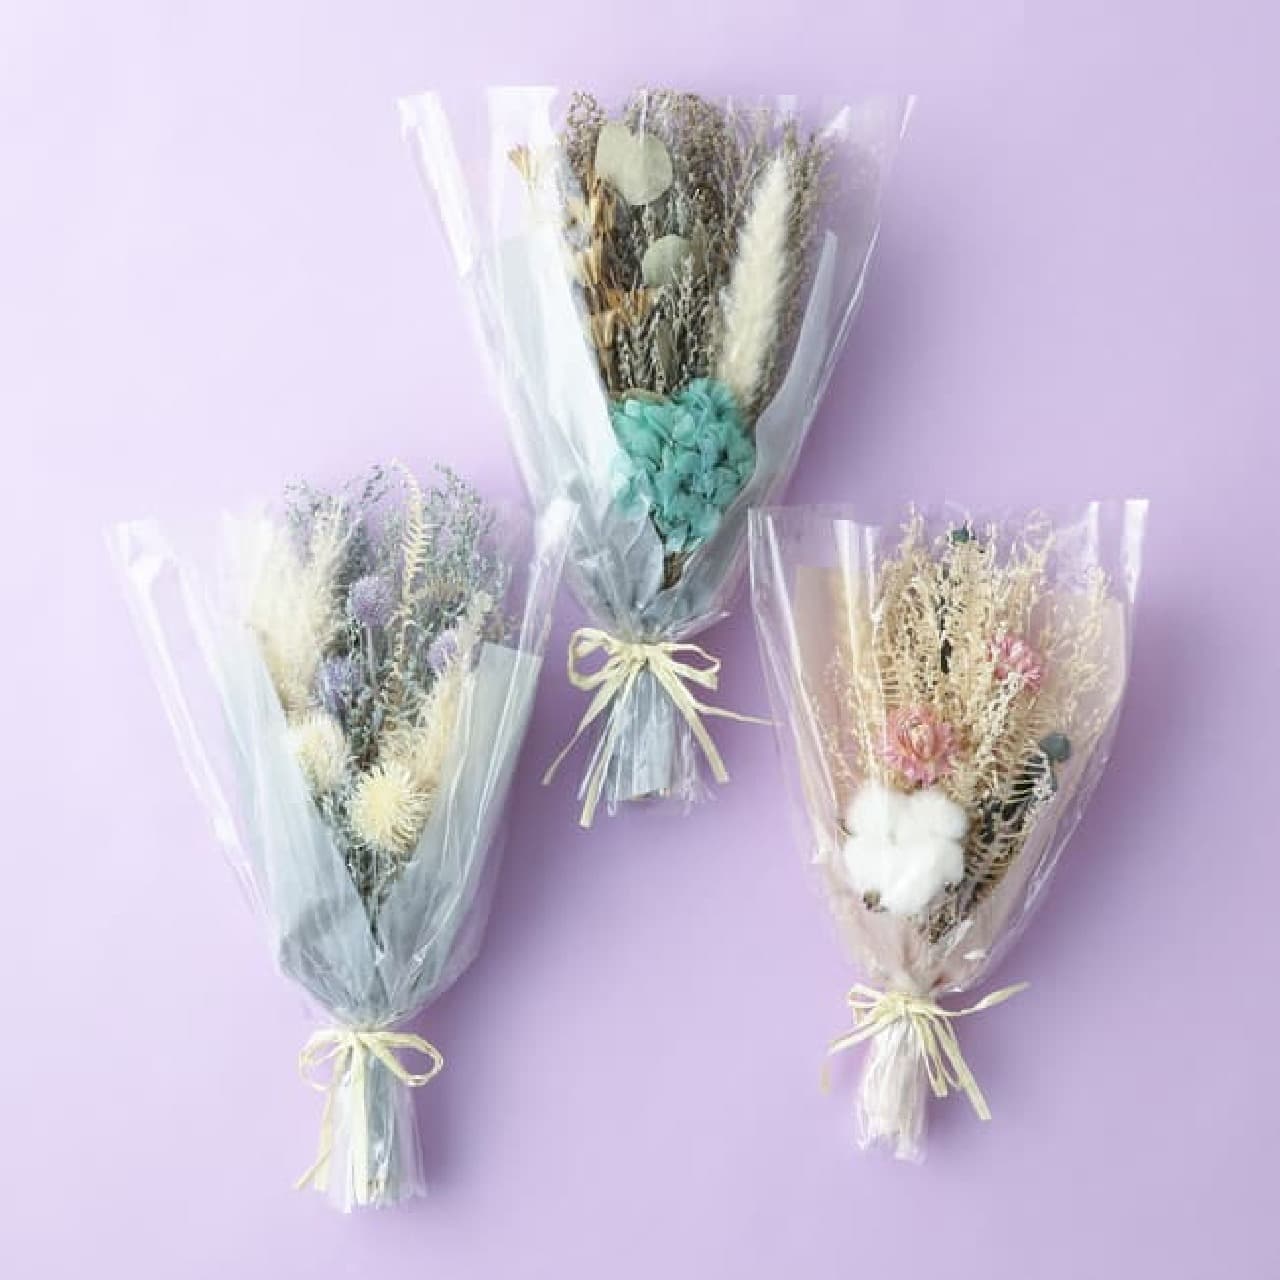 Francfranc's New Spring Gifts -- Dried Bouquet, 2WAY Knee Cover, Pair of Teacups, Tulip-Style Bath Salts, etc.